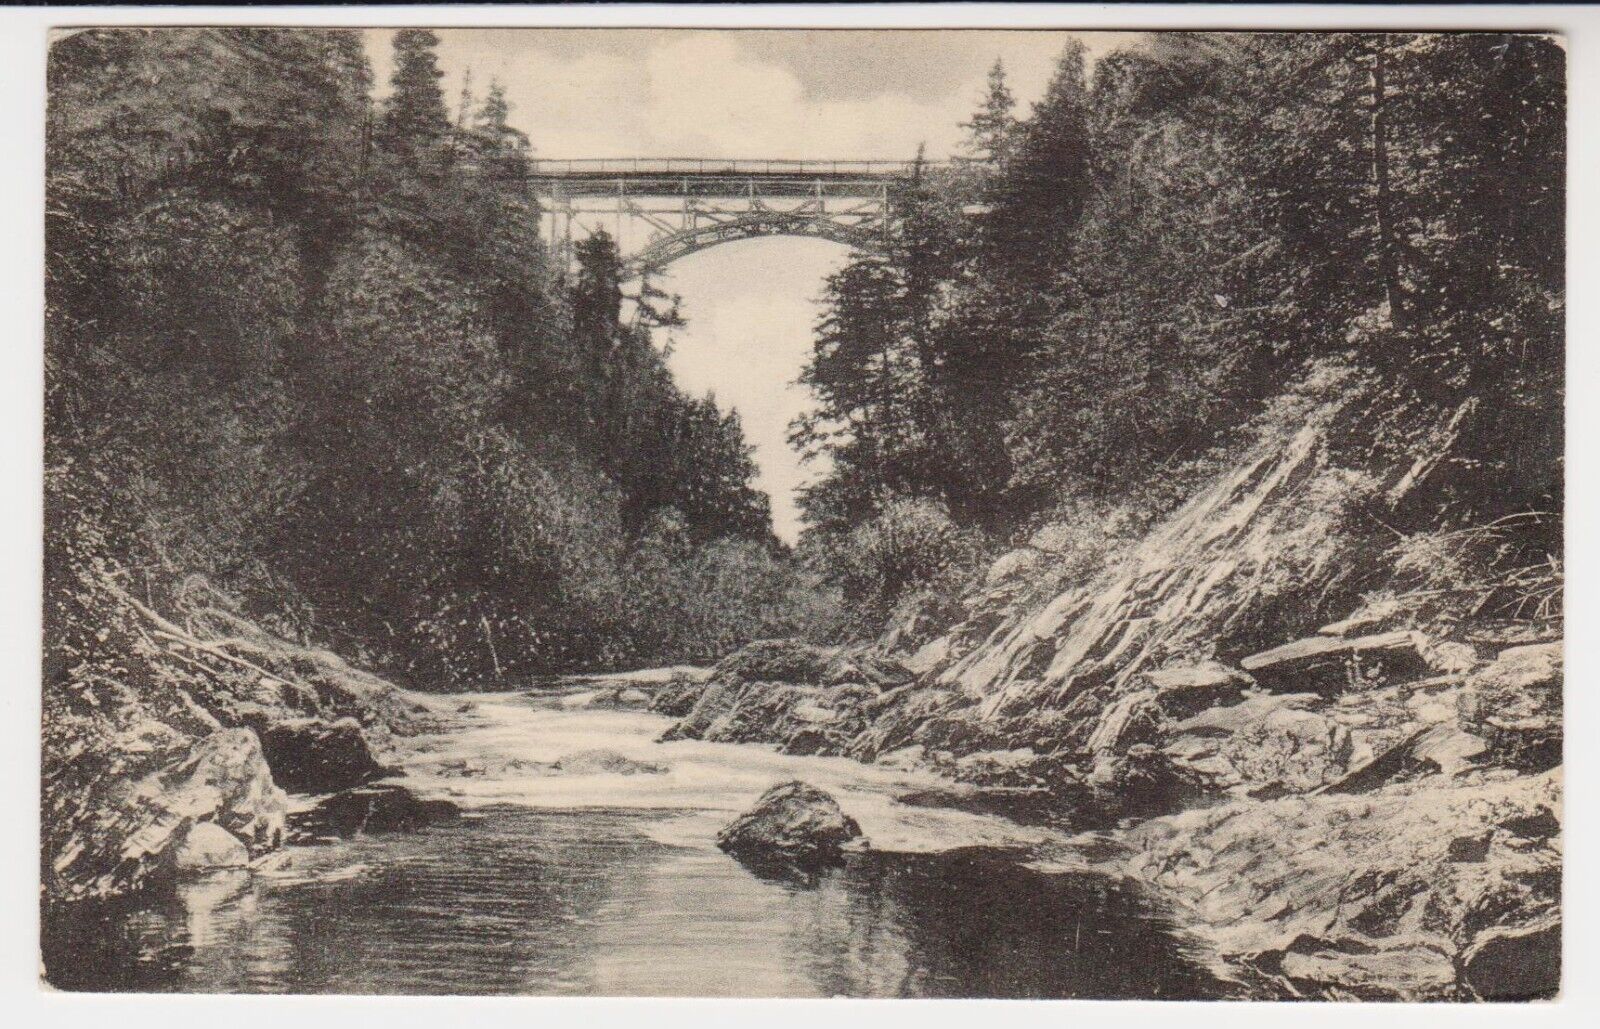 DEWEY’S at QUECHEE GORGE, VERMONT – ALBERTYPE – Posted 1952 Postcard